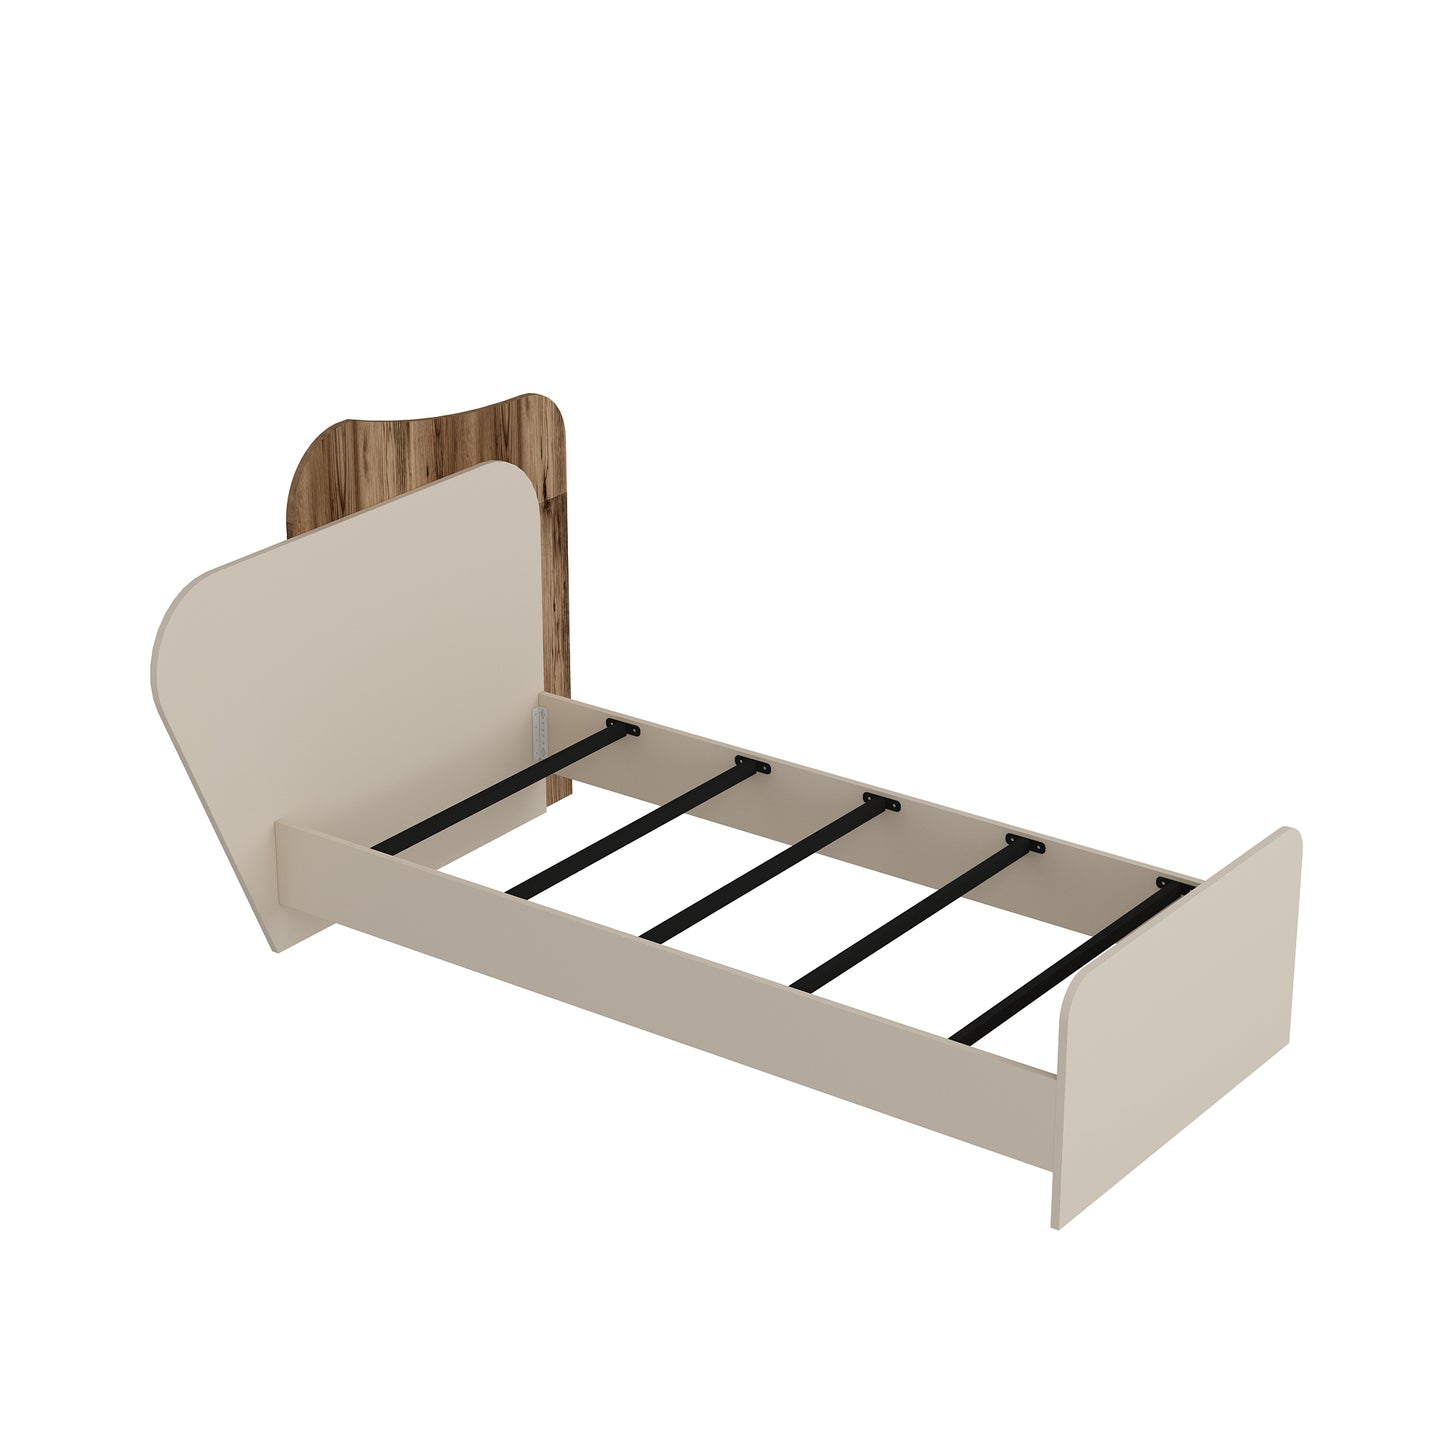 Babel Bedstead Bed Frame with Headboard